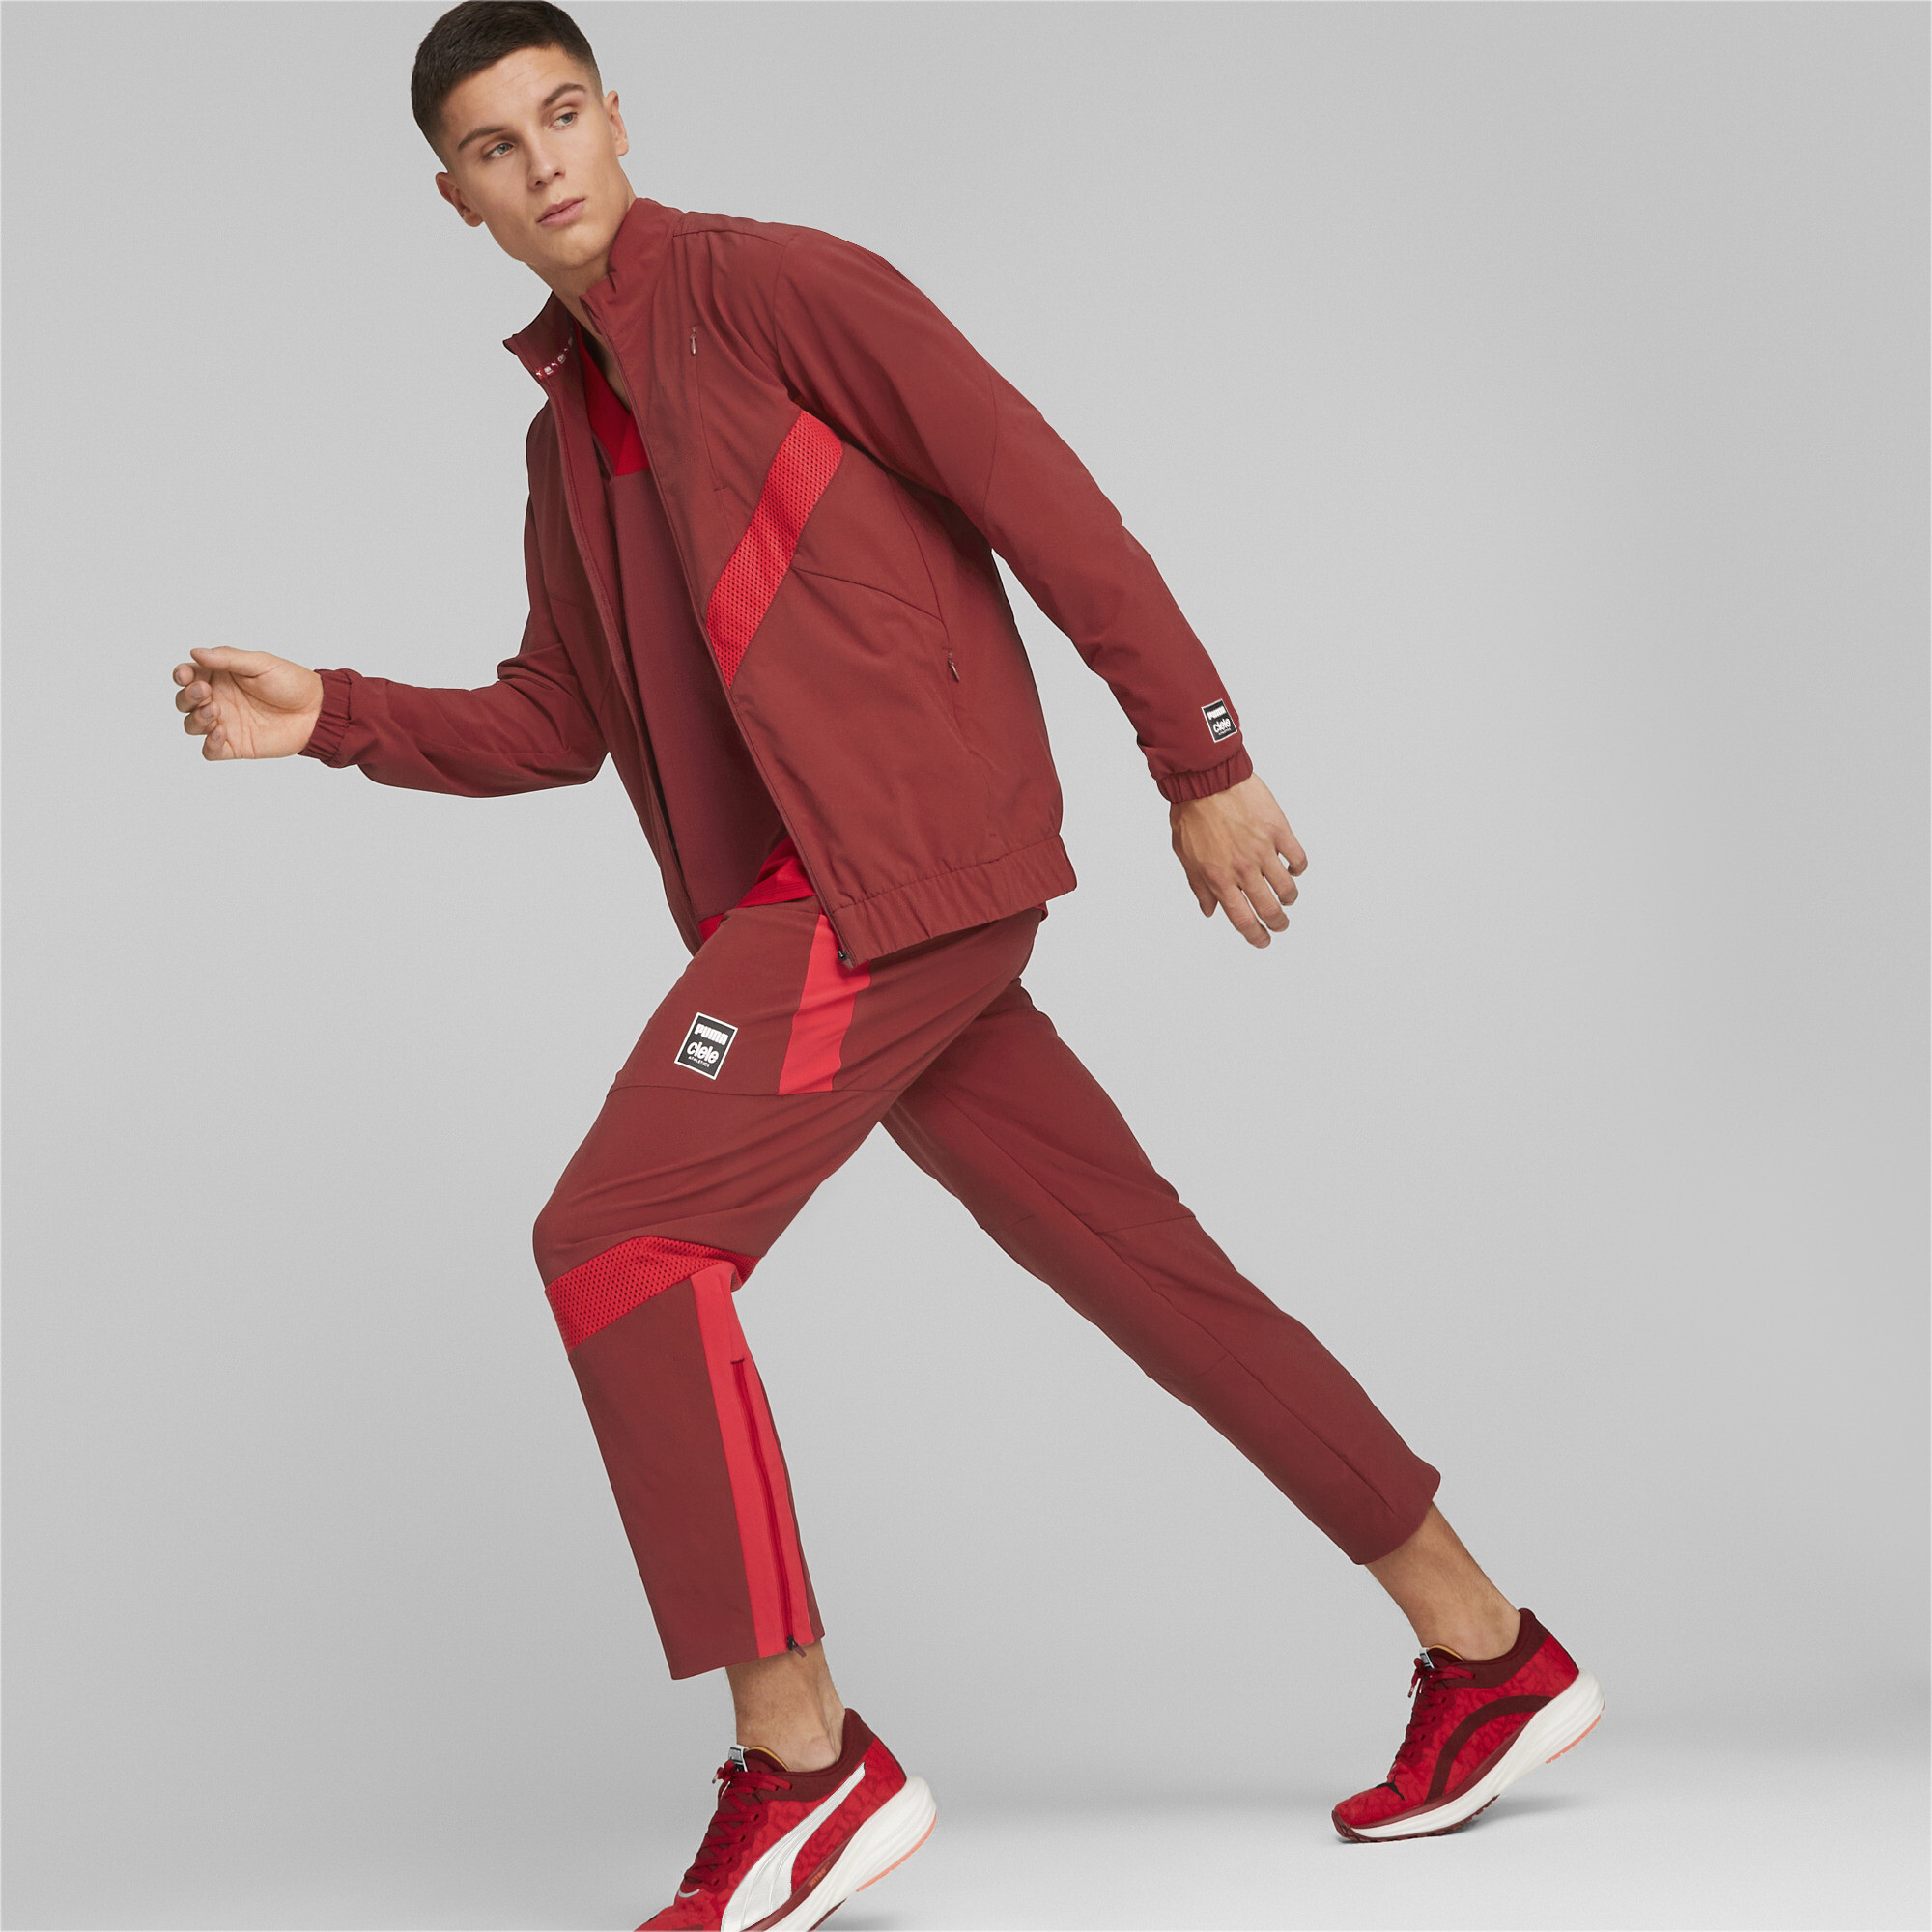 Men's PUMA X CIELE Running Tracksuit Jacket In Red, Size Large